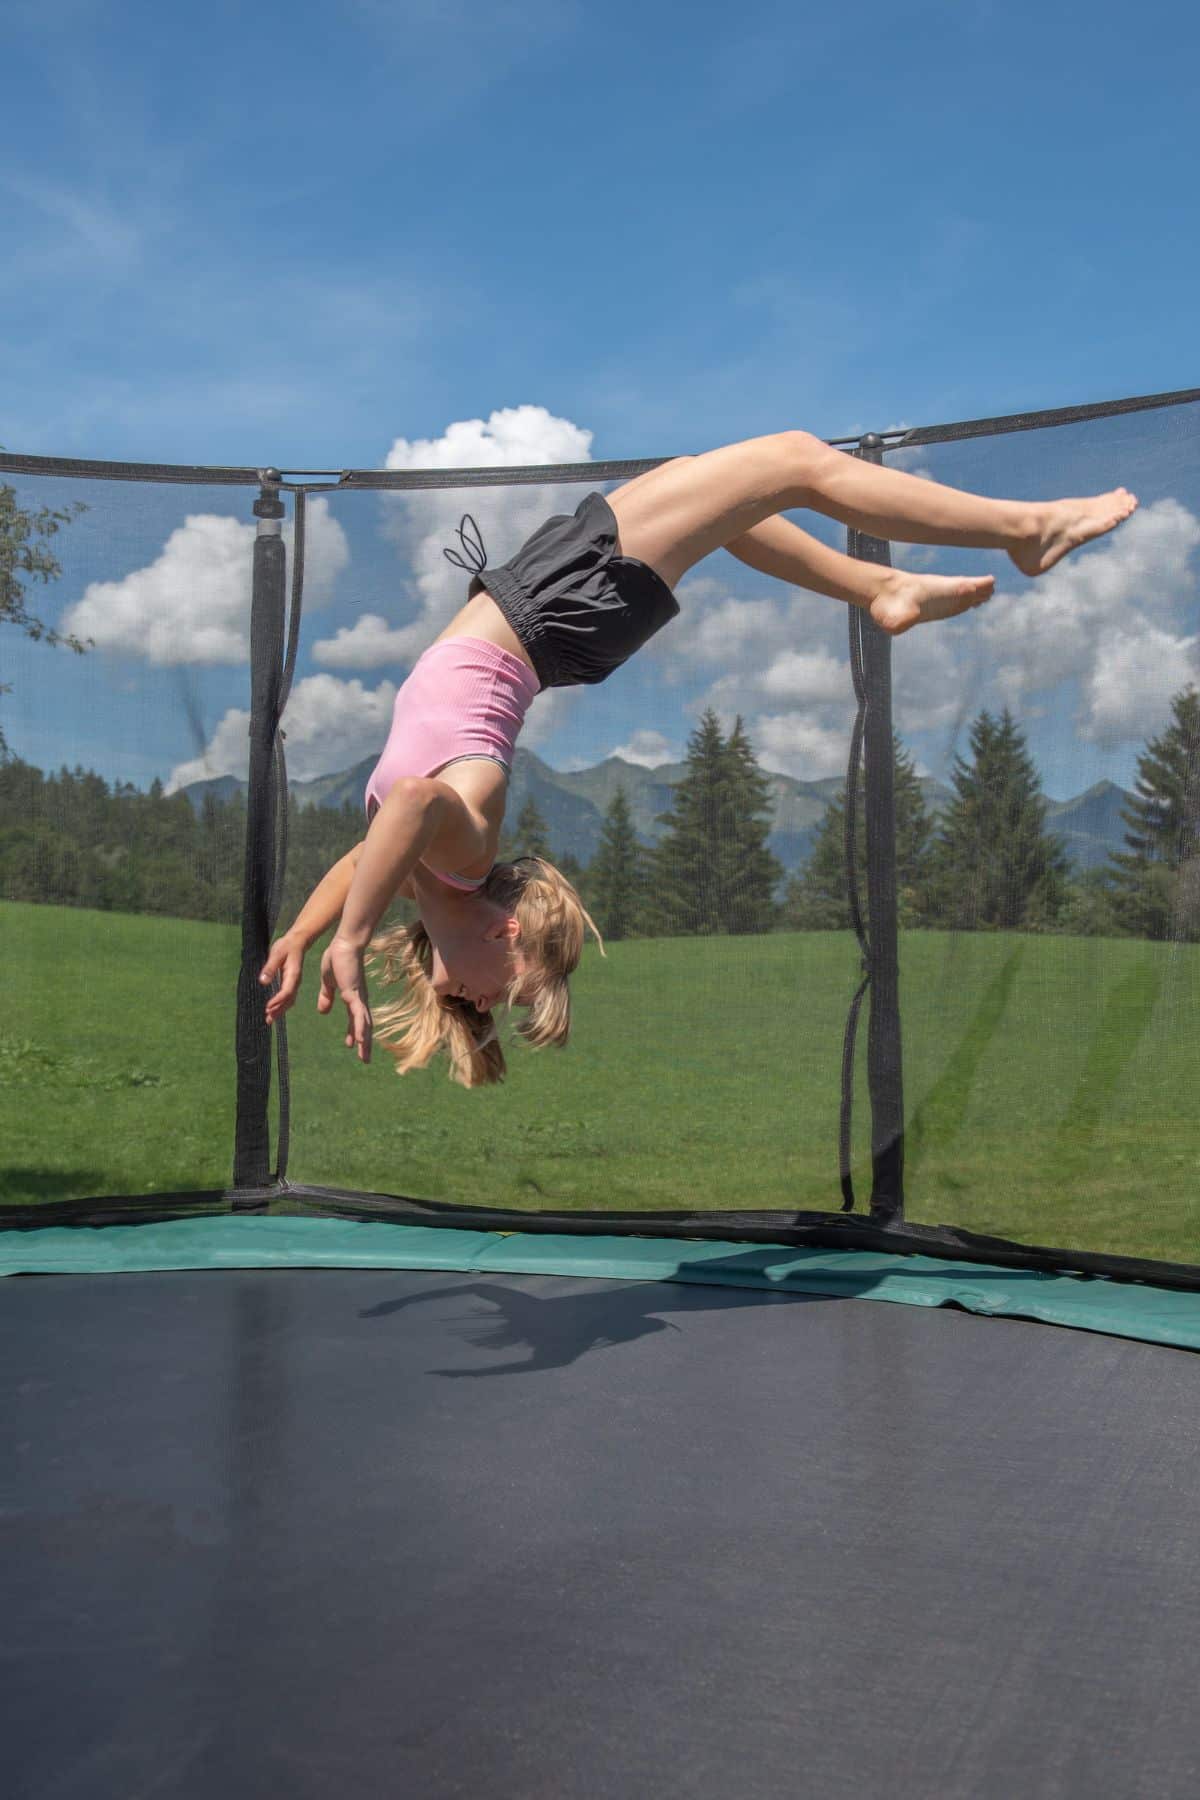 a girl doing a backflip on a trampoline.